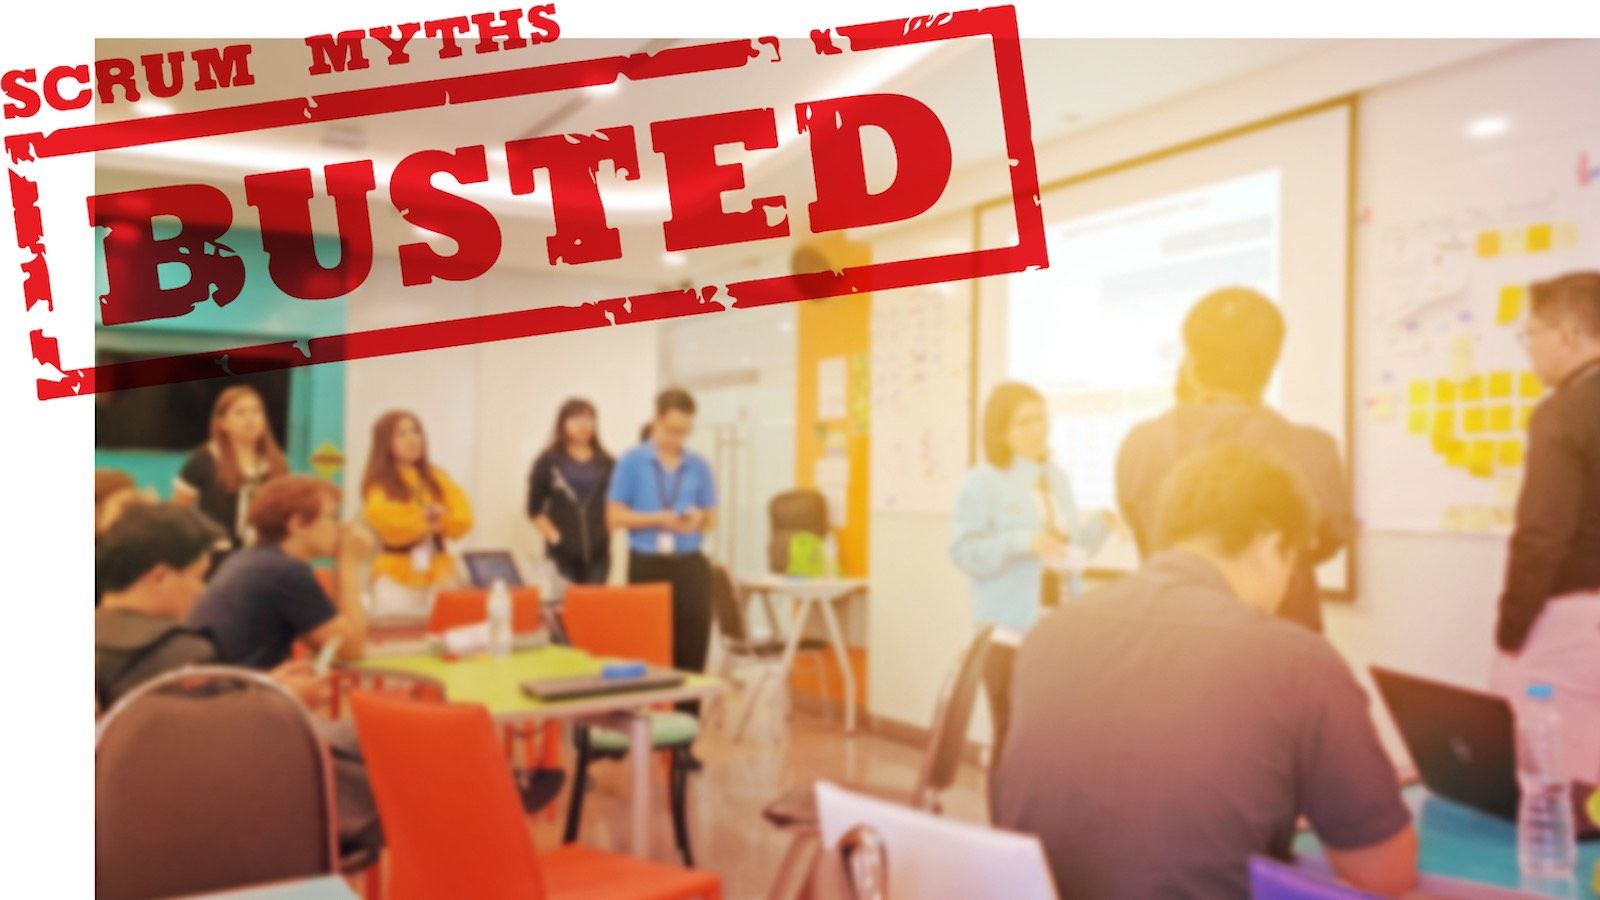 scrum myths busted